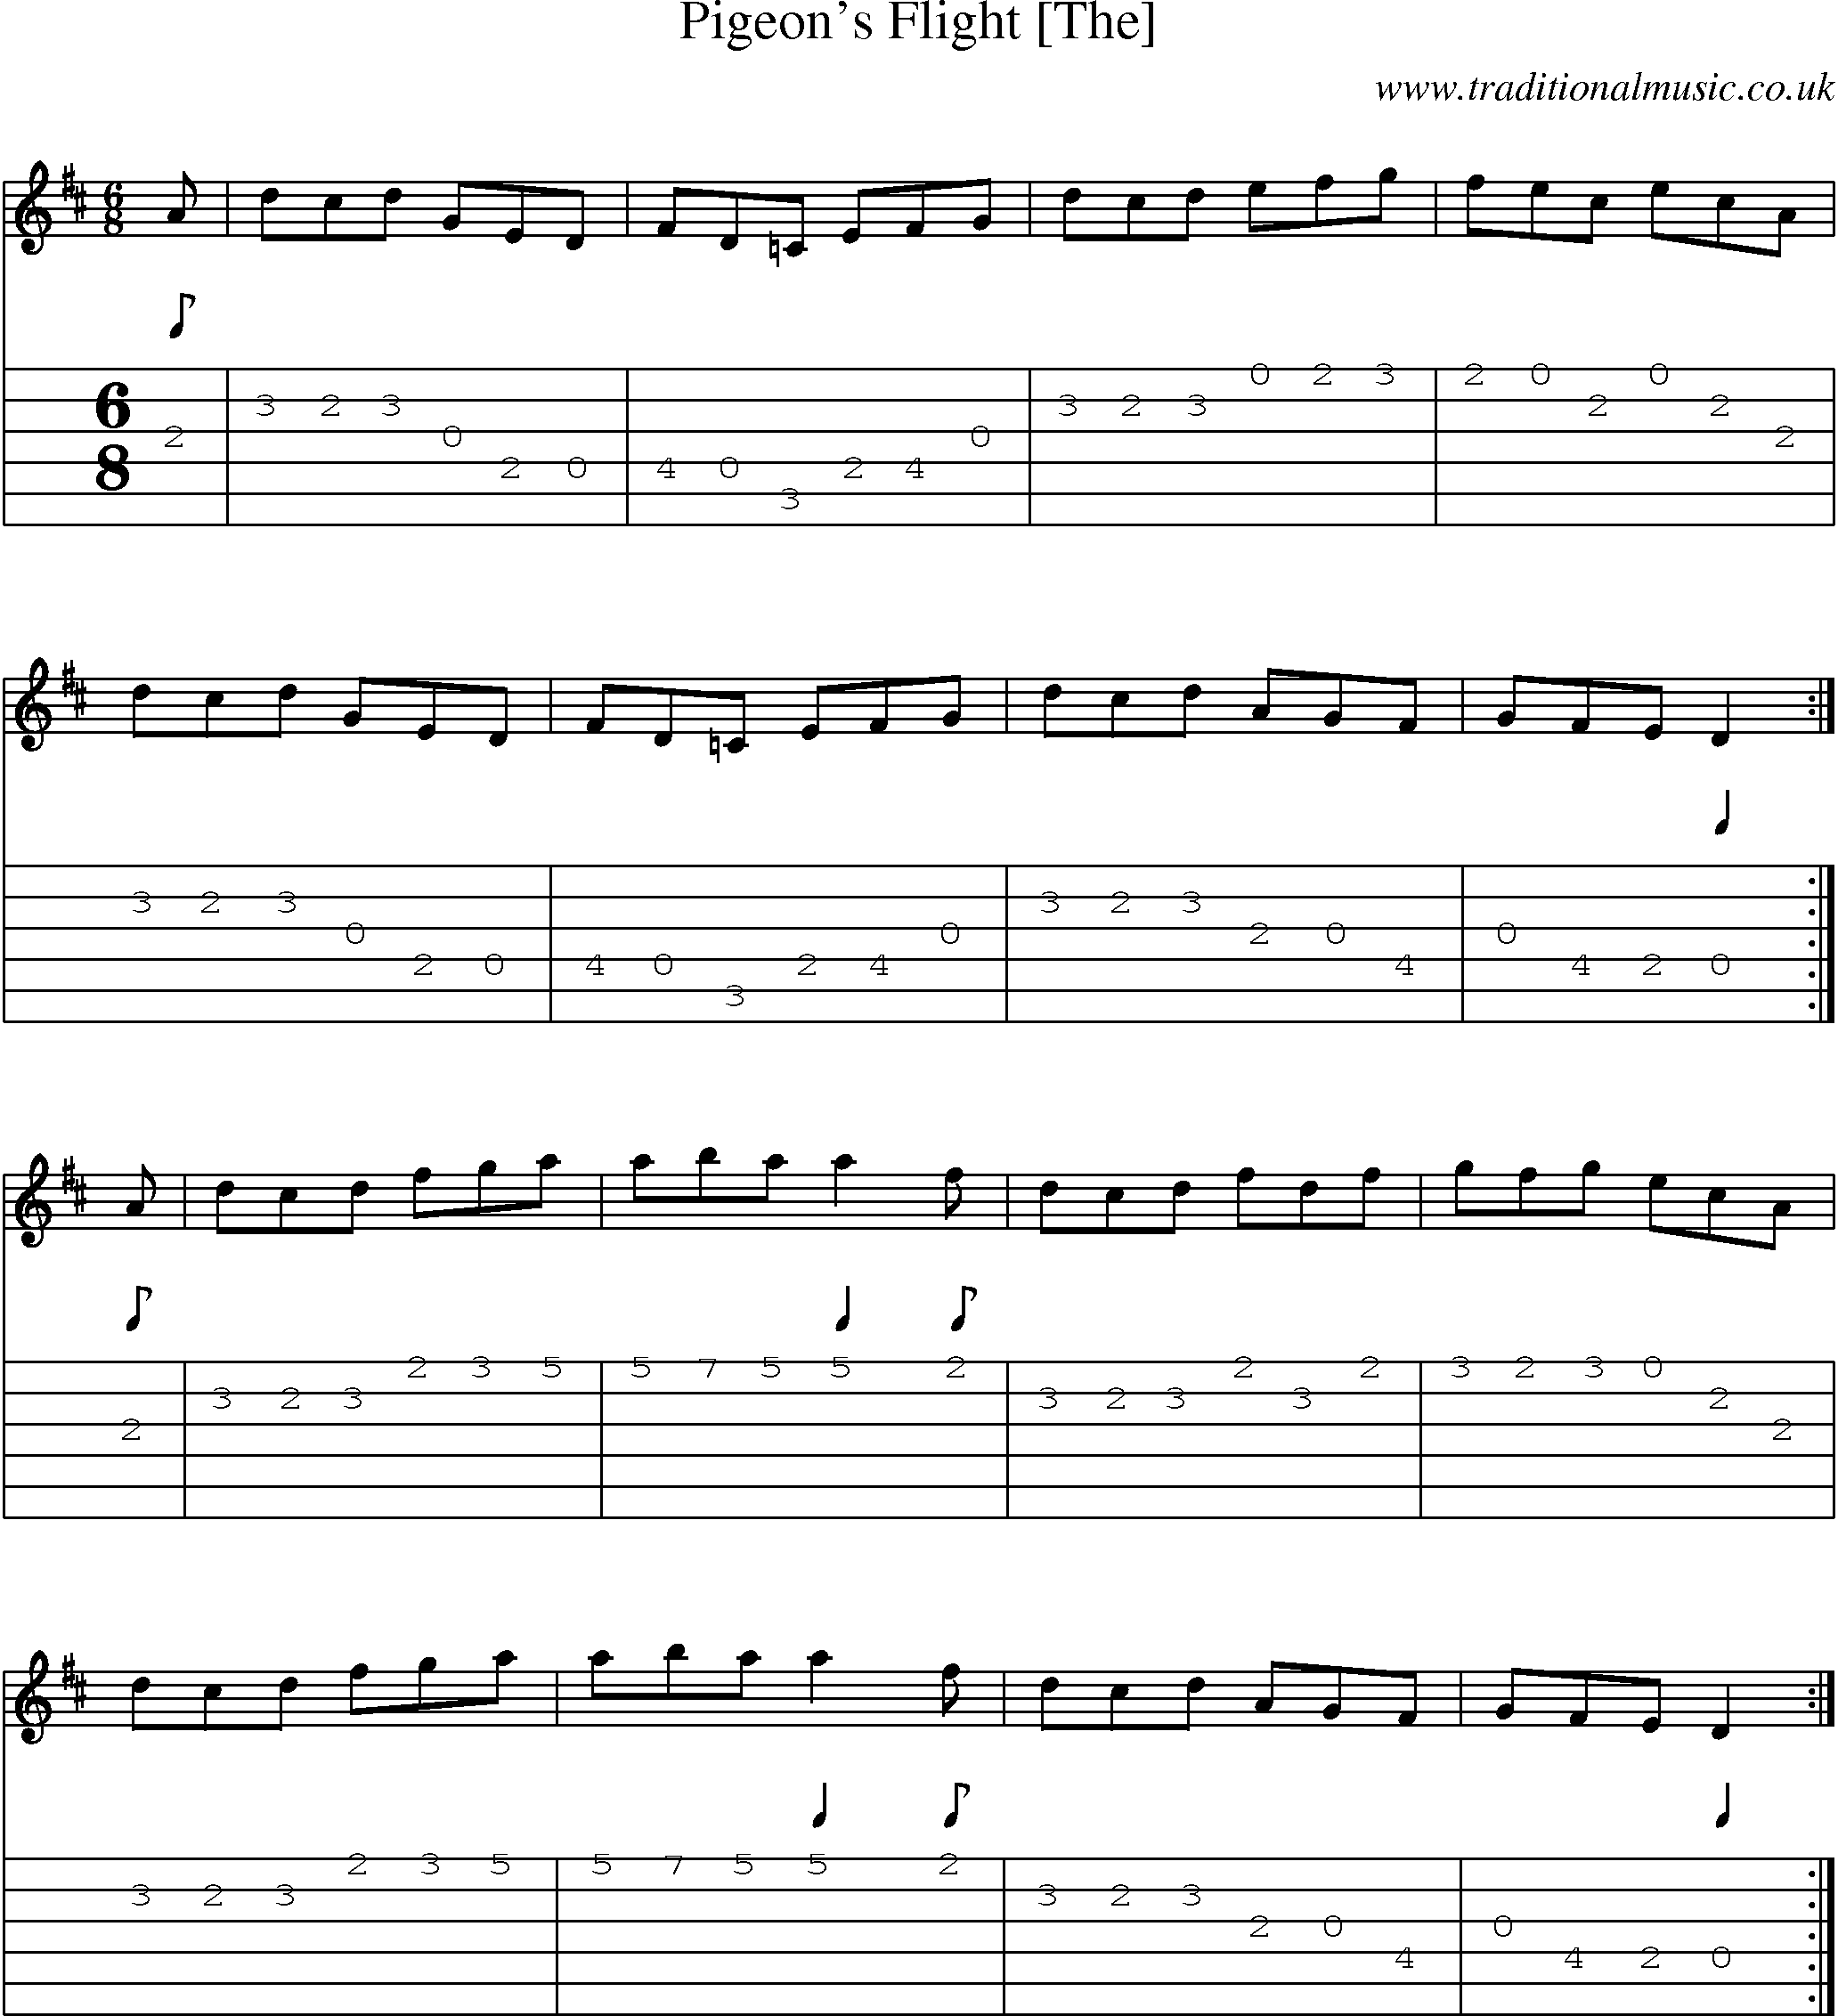 Music Score and Guitar Tabs for Pigeons Flight